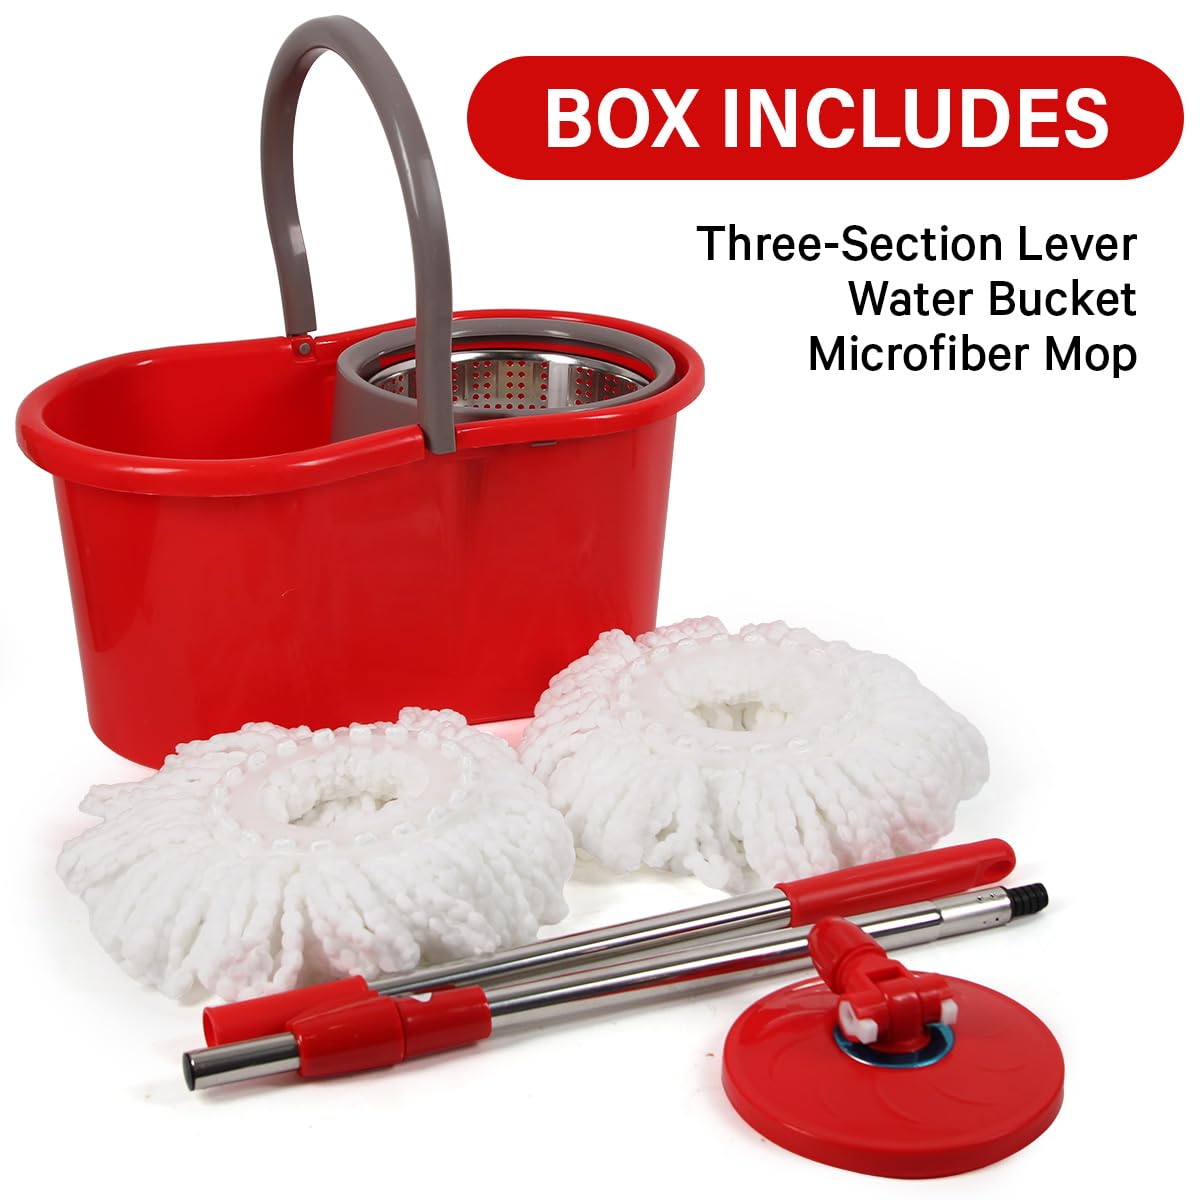 Spin Mop and Bucket with Wringer Set, 360° Spinning Mop and Bucket System with Double Cotton Tip Replacement Heads and Stainless Steel Adjustable Handle for Floor Cleaning (20QT)